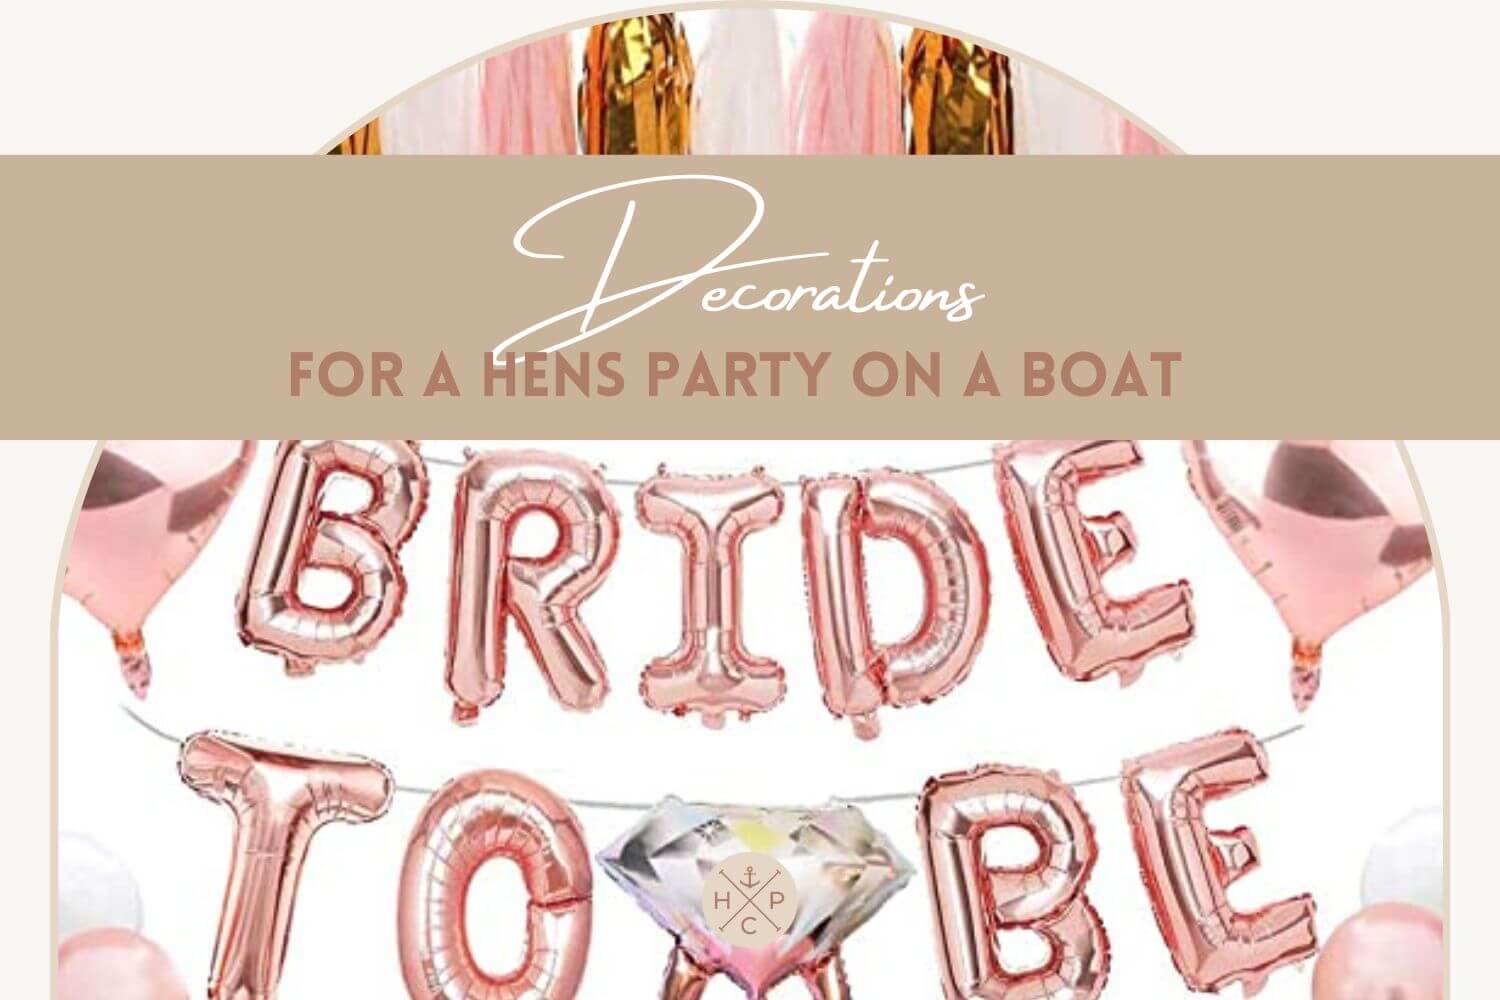 decorations for hens party on a boat